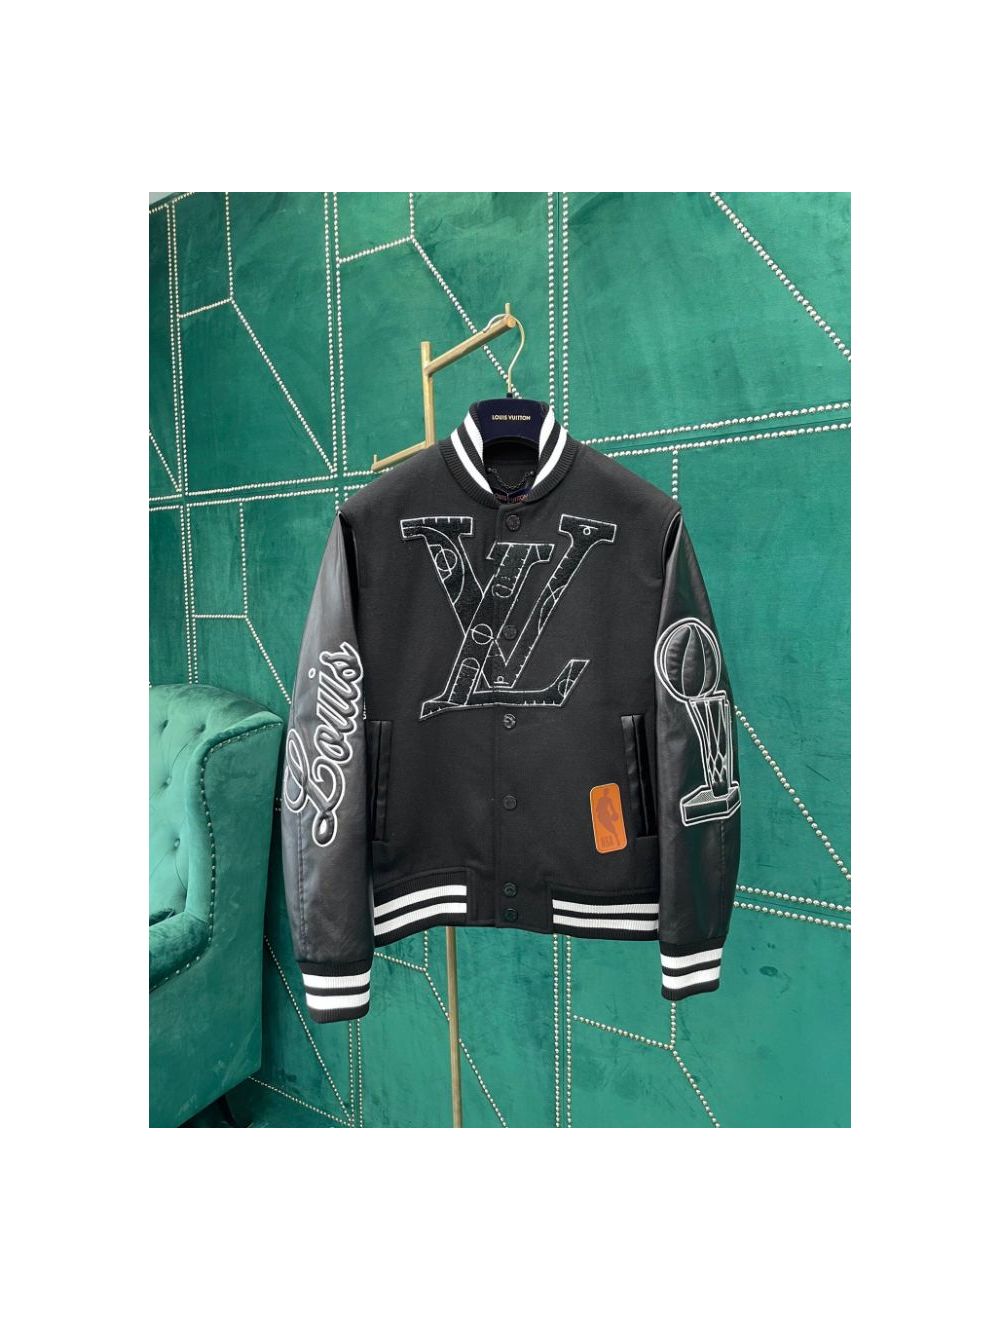 Louis Vuitton x NBA Leather Basketball Jacket Black from cloyad : r